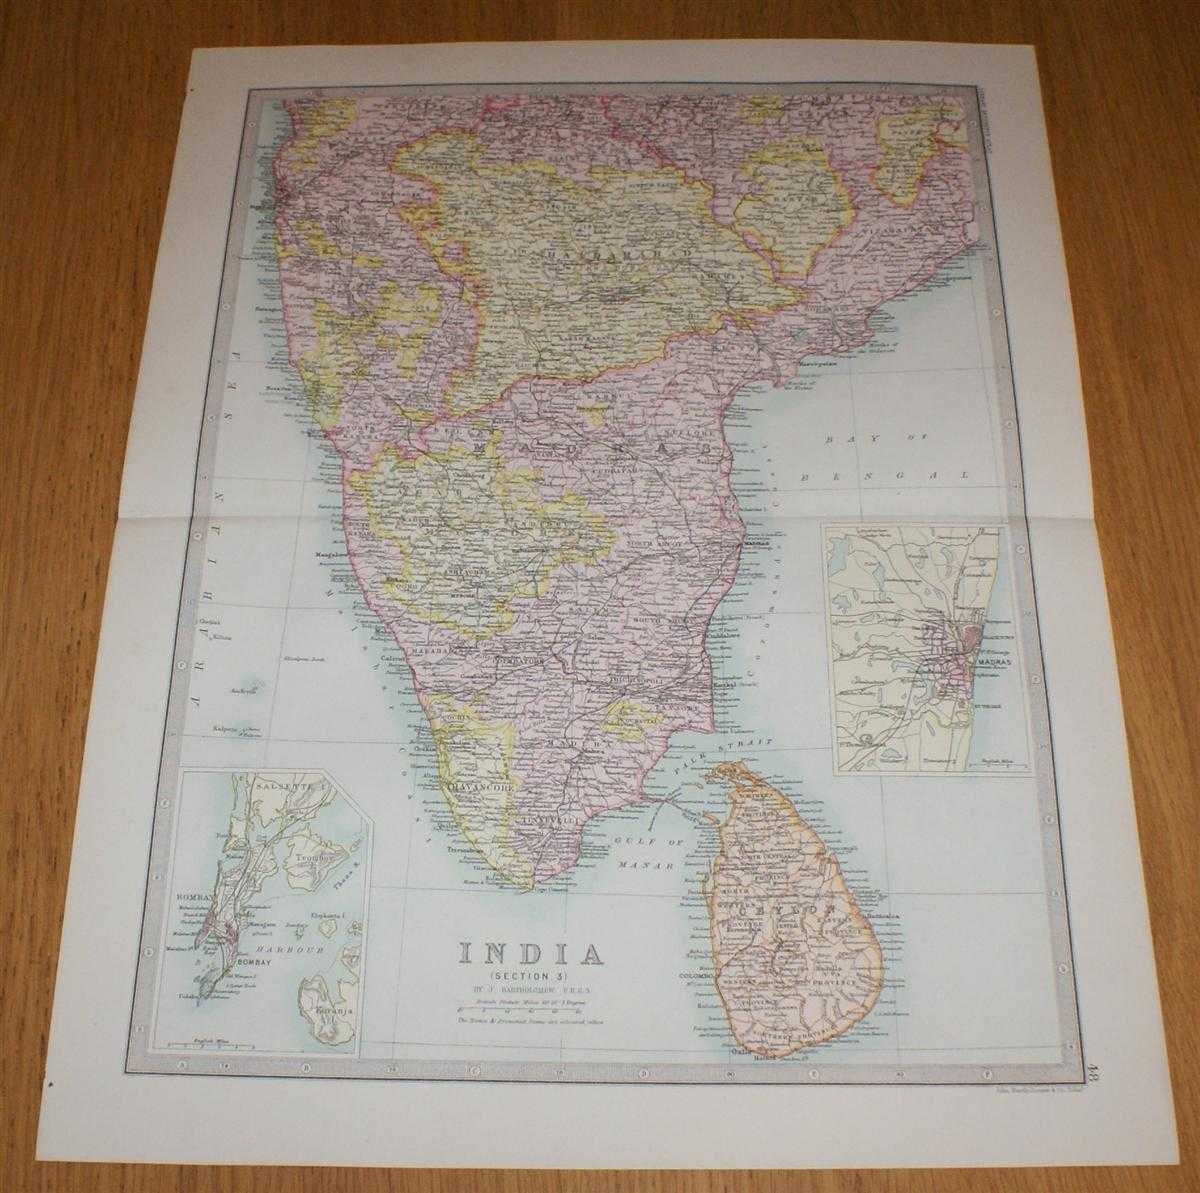 John Bartholomew - Map of India (Section 3) covering southern India and Ceylon (Sri Lanka) including small inset plans of Madras and Bombay - Sheet 48 Disbound from the 1890 'The Library Reference Atlas of the World'